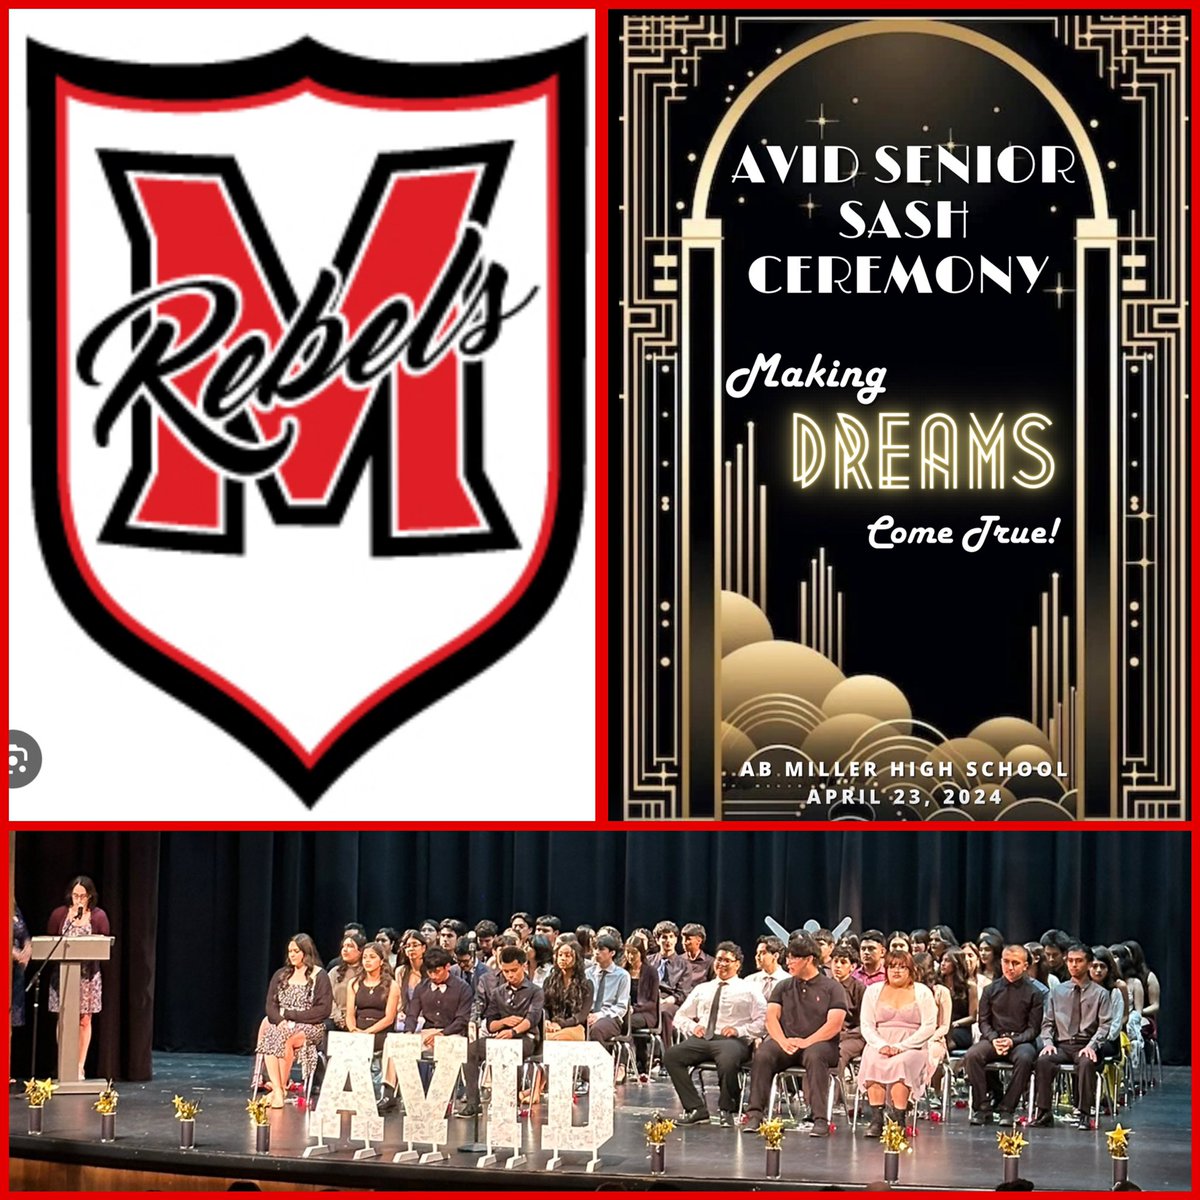 It’s the most wonderful time of the year in @FontanaUnified ❤️ Joining @ABMillerHS for the #AVIDseniorsash ceremony recognizing 57 remarkable seniors and the educators who inspire and support them! #IBelieveInFUSD #RightWhereIBelong